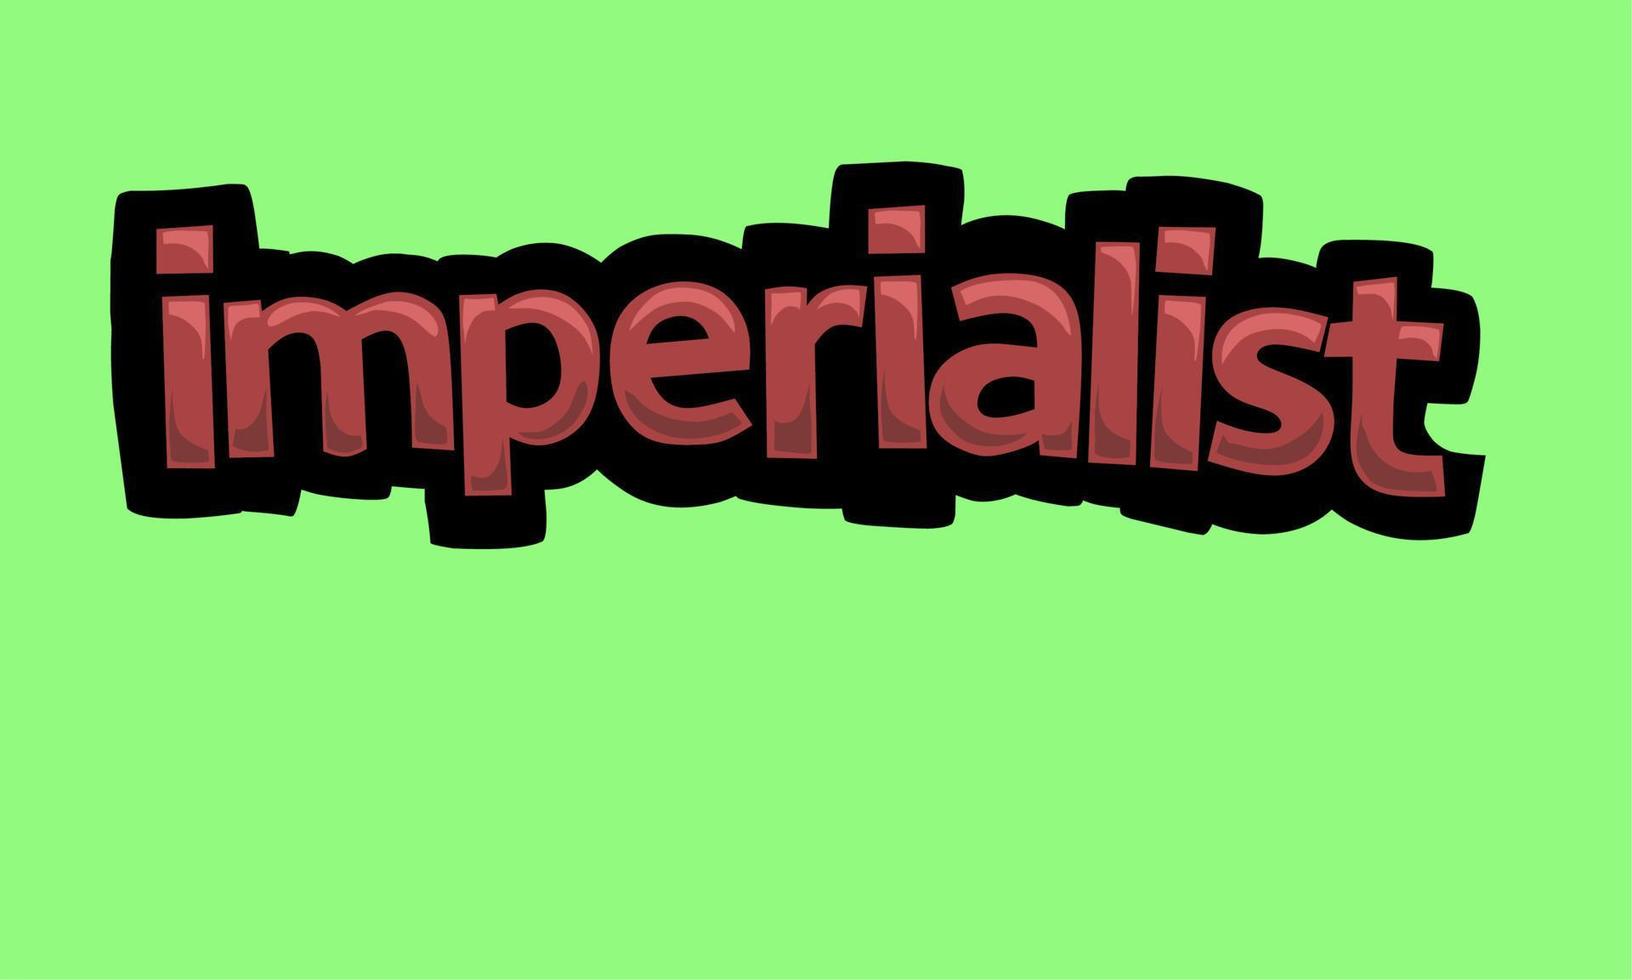 IMPERIALIST writing vector design on a green background